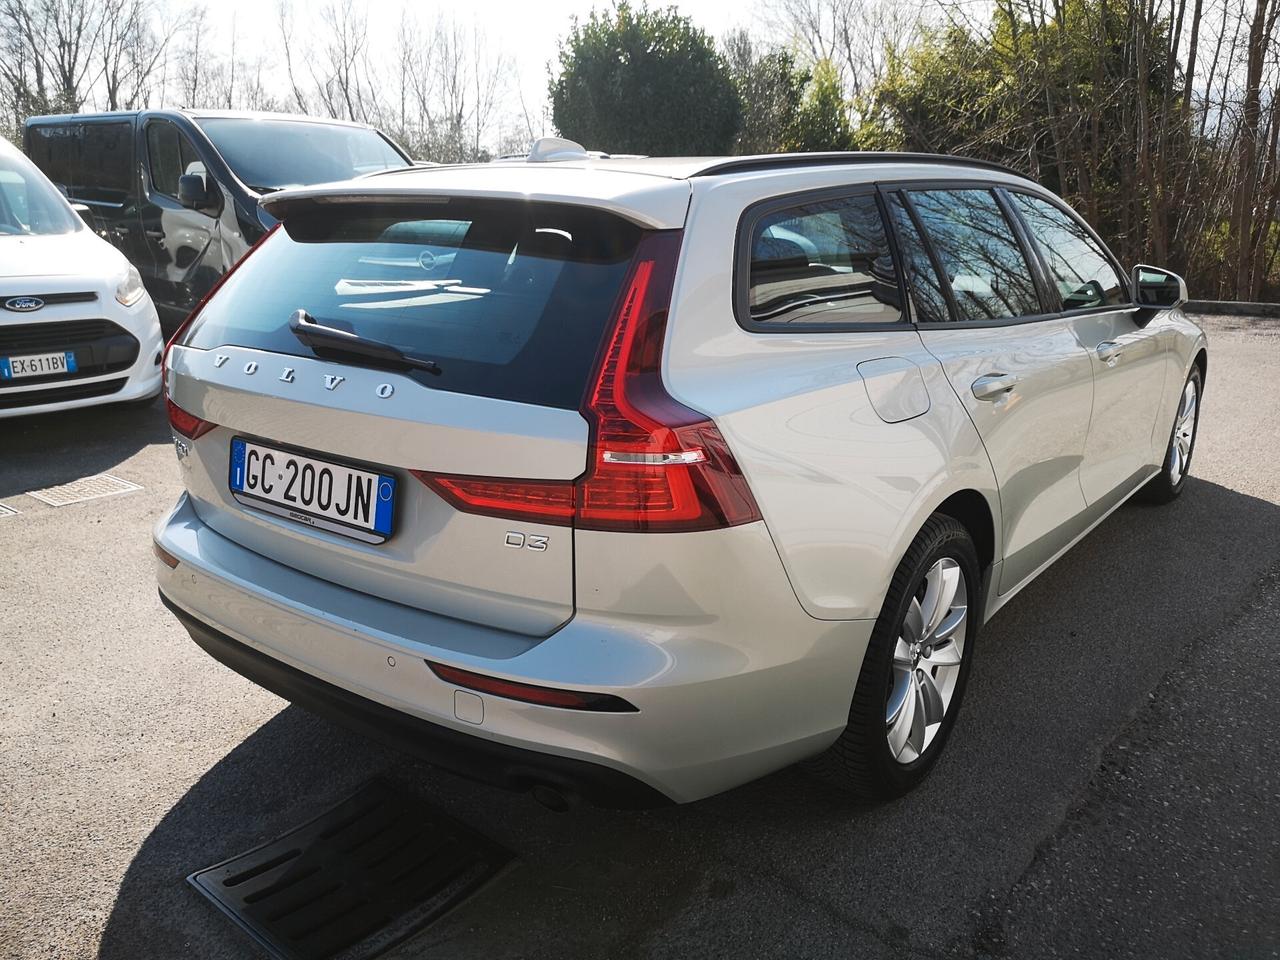 Volvo V60 D3 Geartronic Business